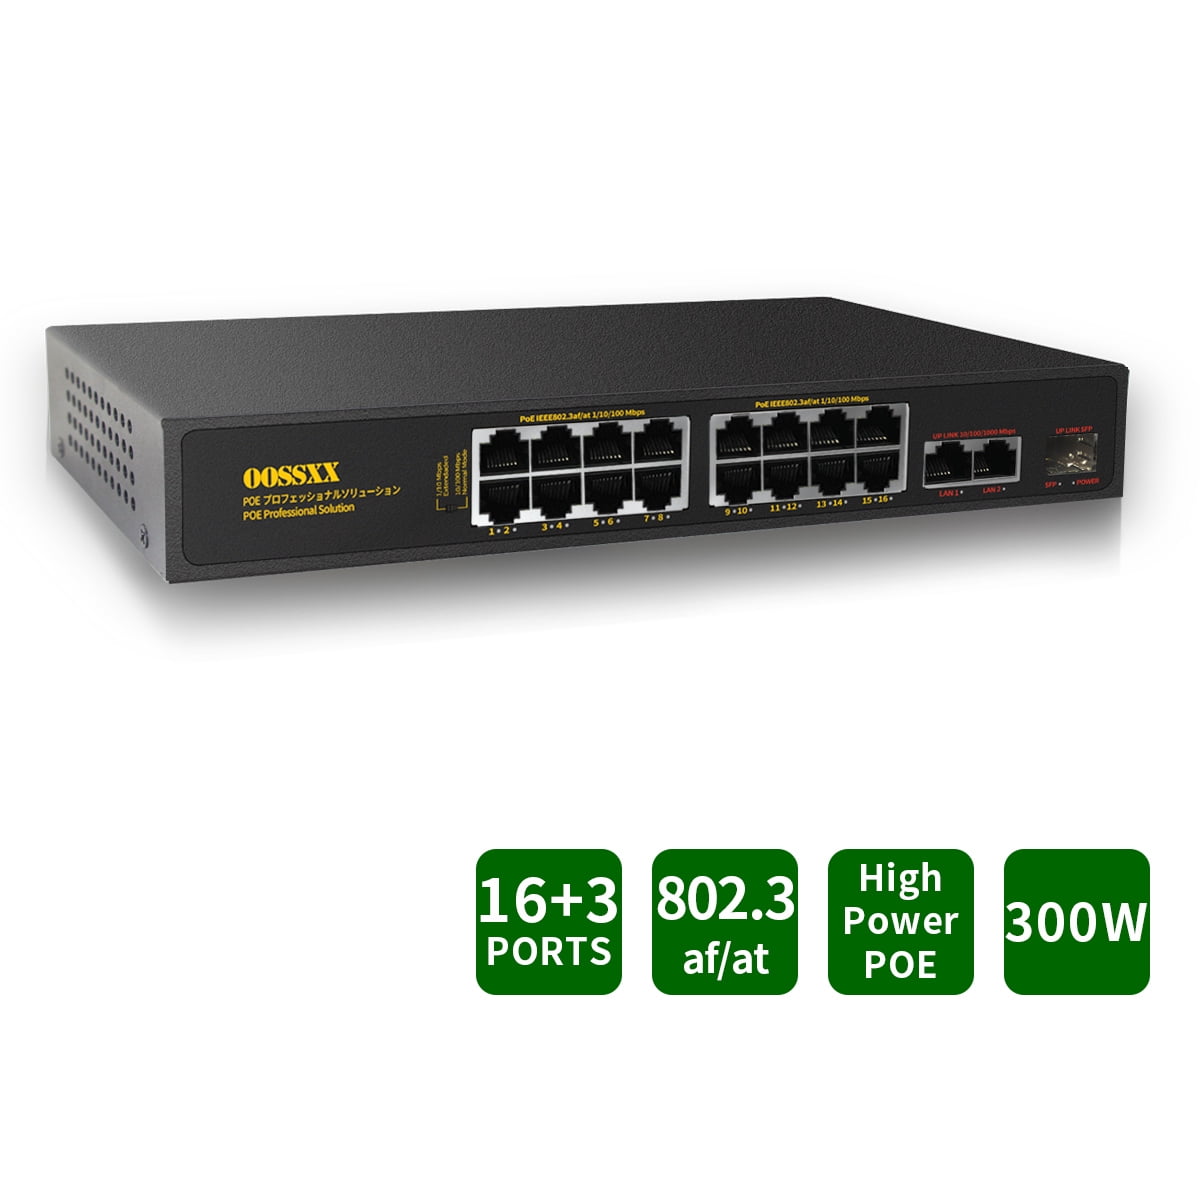 MokerLink 3 Ports Gigabit PoE Passthrough Switch, IEEE 802.3af/at PoE  Repeater, 100/1000Mbps, 1 PoE in 2 PoE Out, Wall Mount, PoE